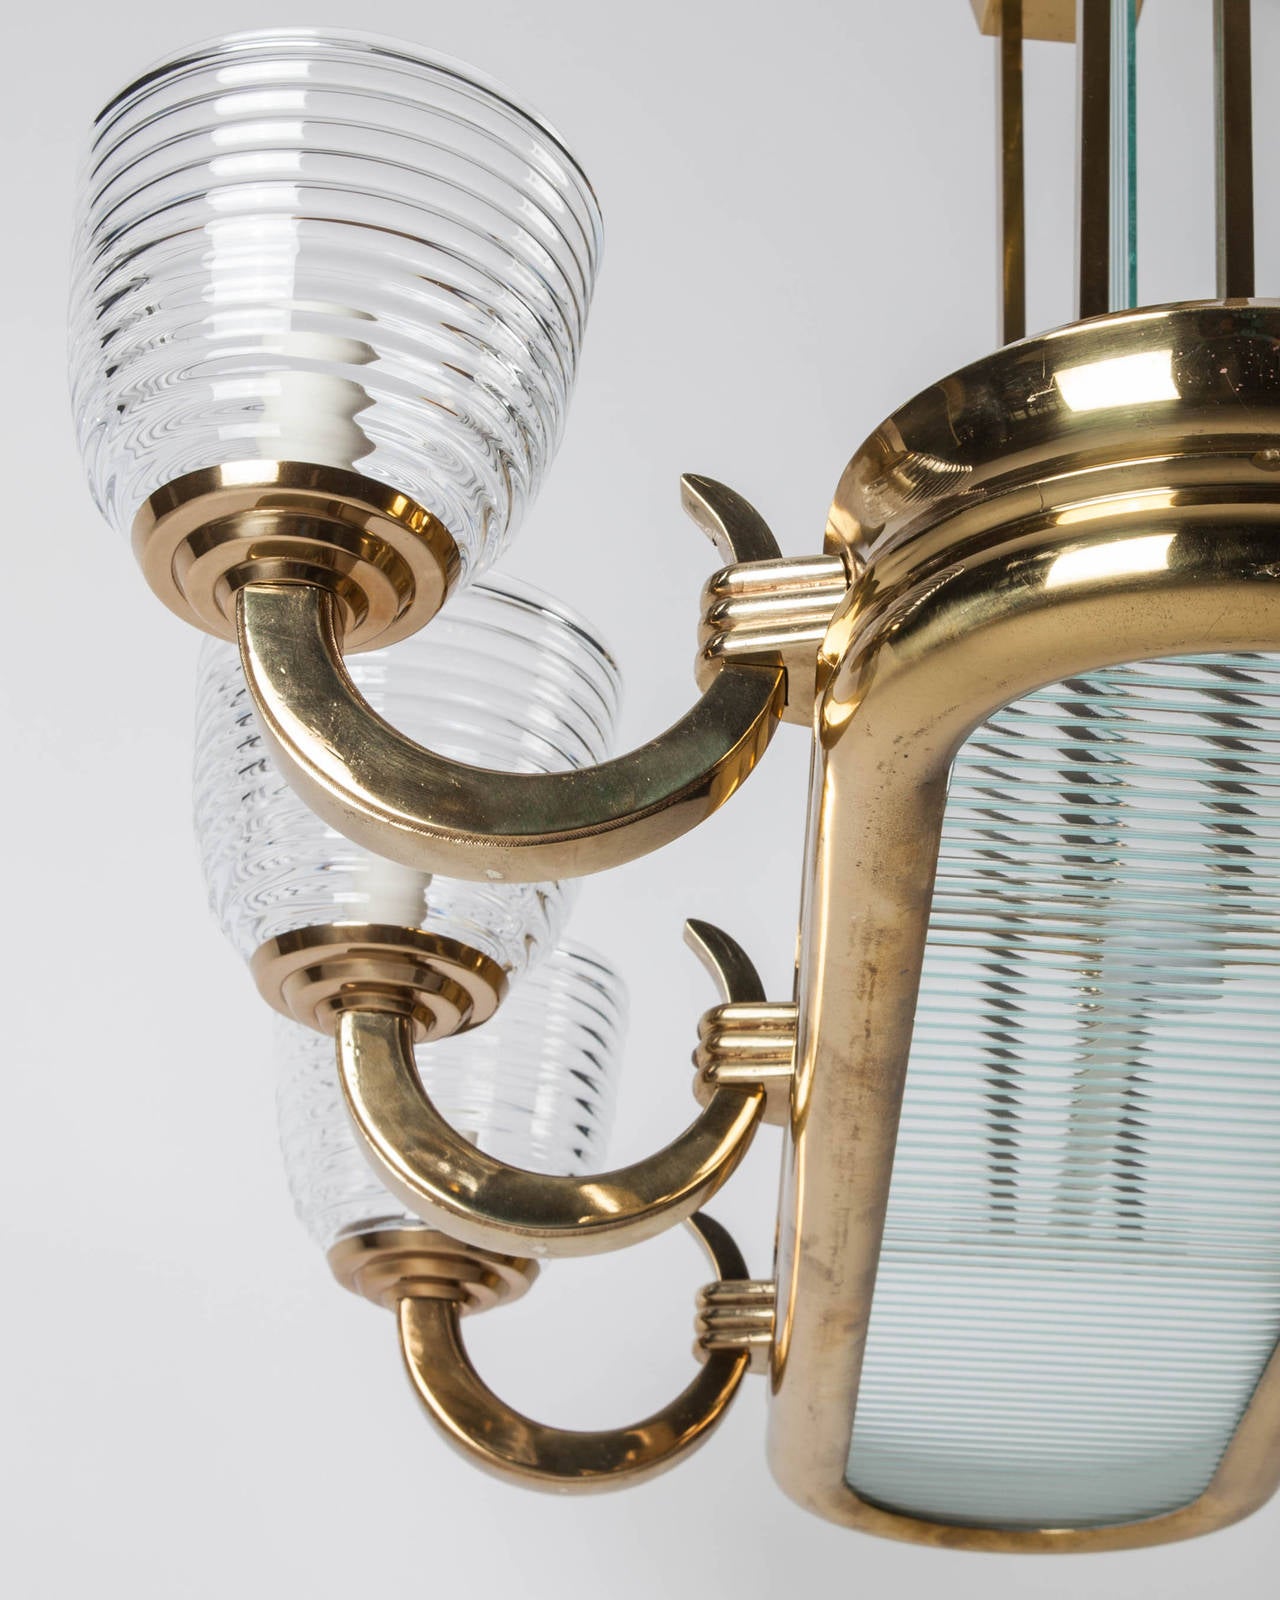 Polished Art Deco Linear Chandelier in Solid Brass with Six Arms & Handblown Glass Shades For Sale